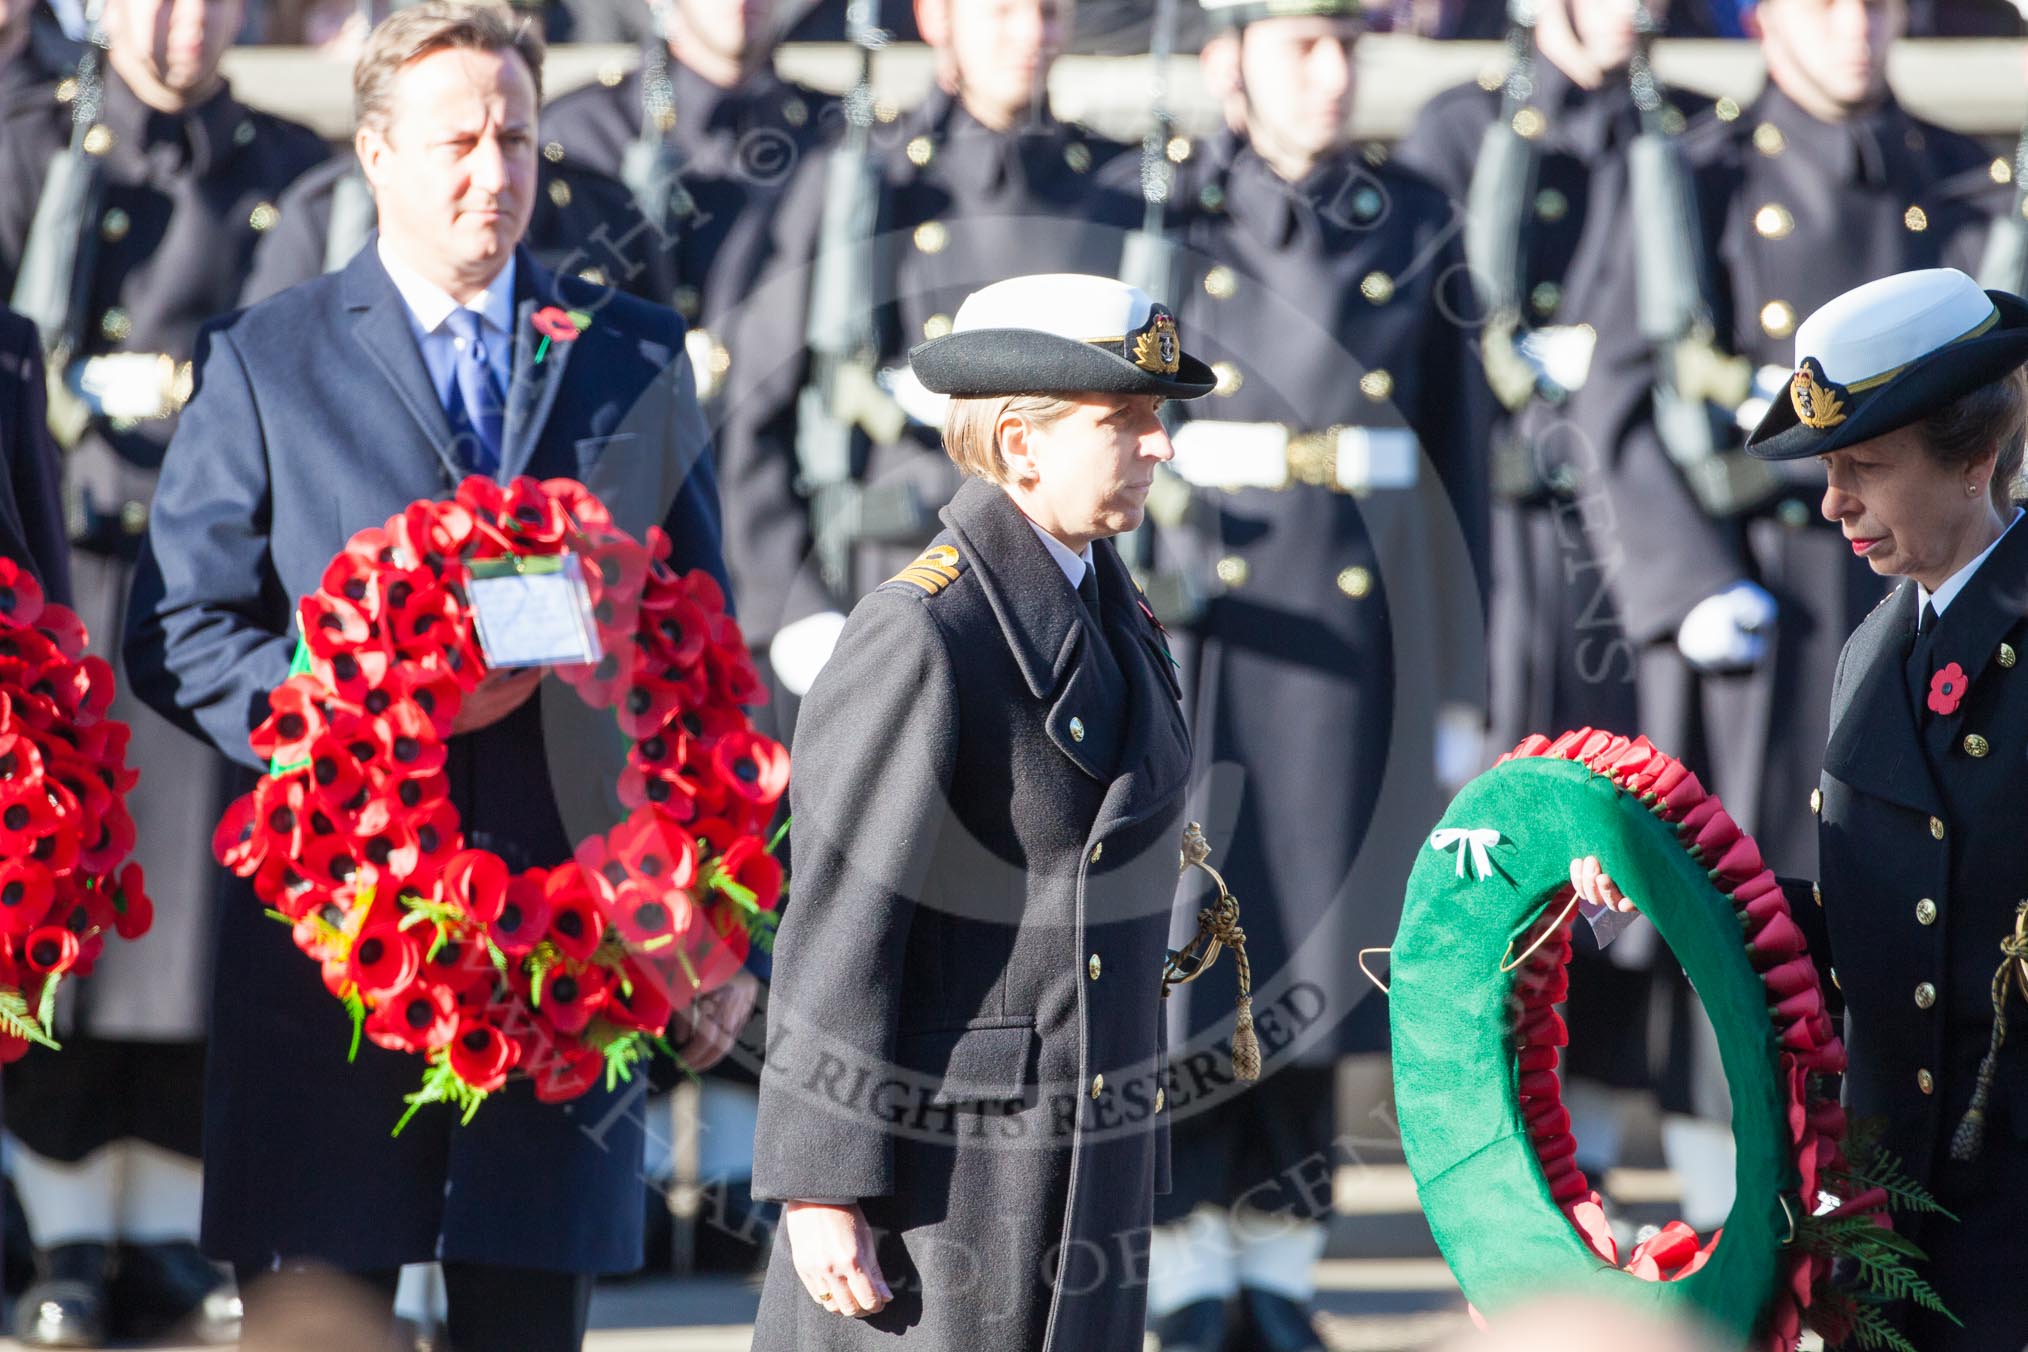 Commander Anne Sullivan, Royal Navy, handing, as Equerry, the wreath to HRH The Princess Royal. In the background the Prime Minister, David Cameron.